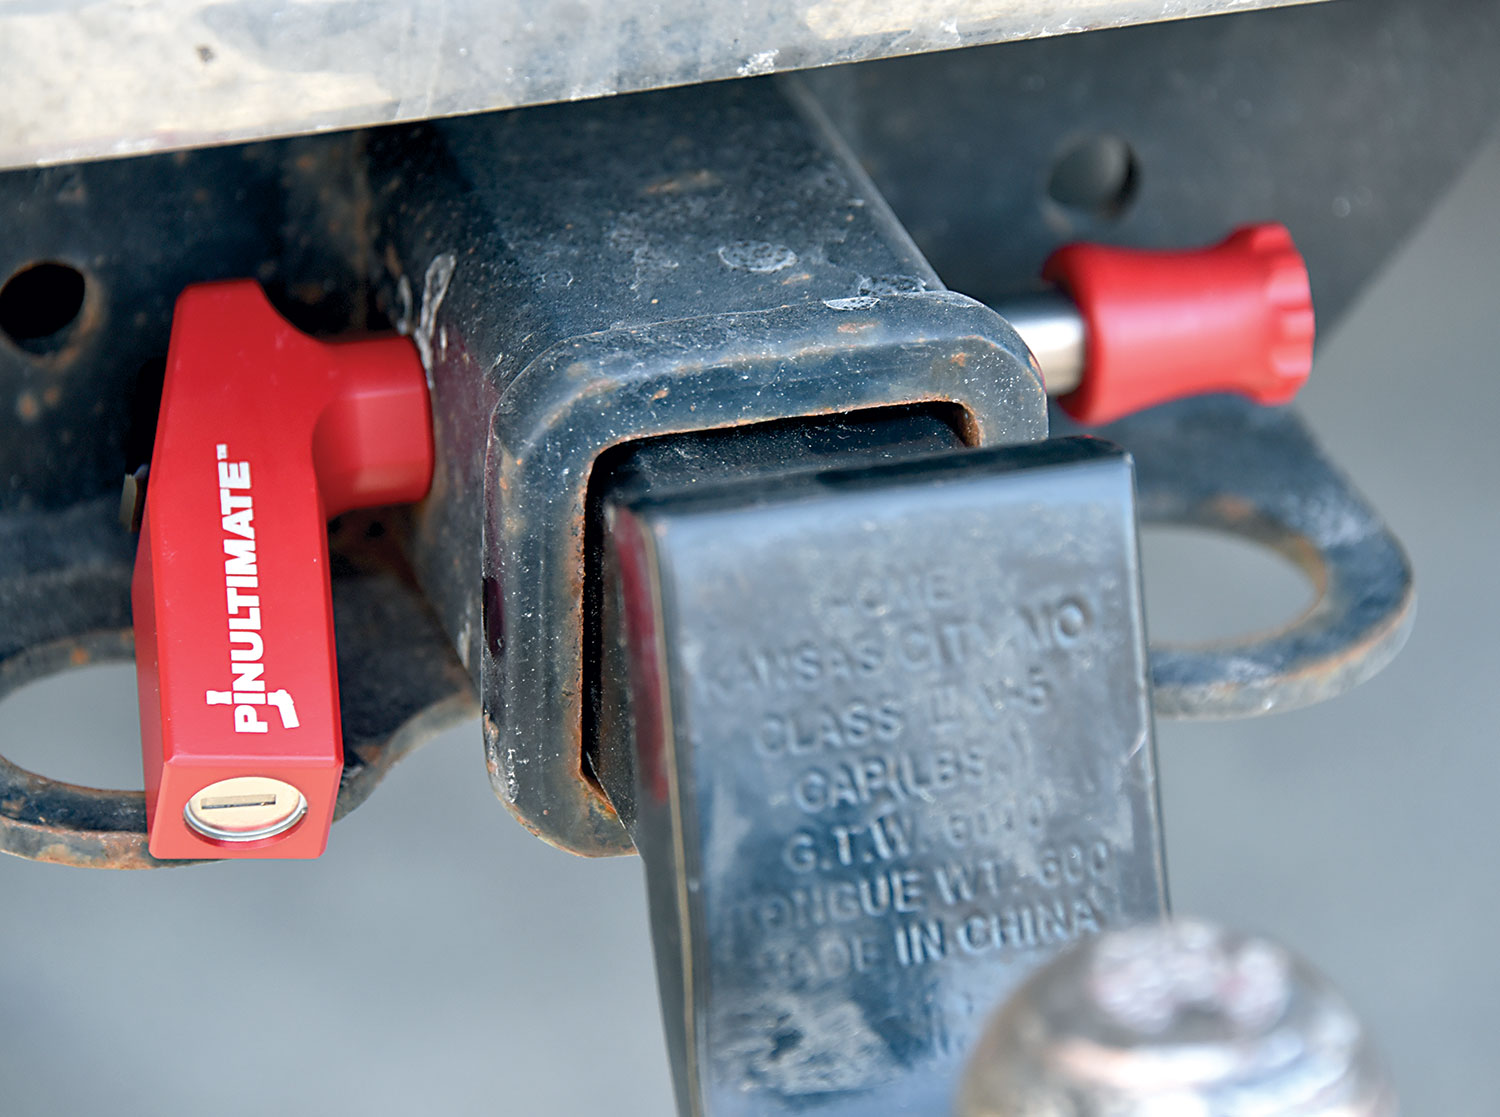 Close-up photograph perspective of the new all-titanium PinUltimate Quick-Release Hitch Pin